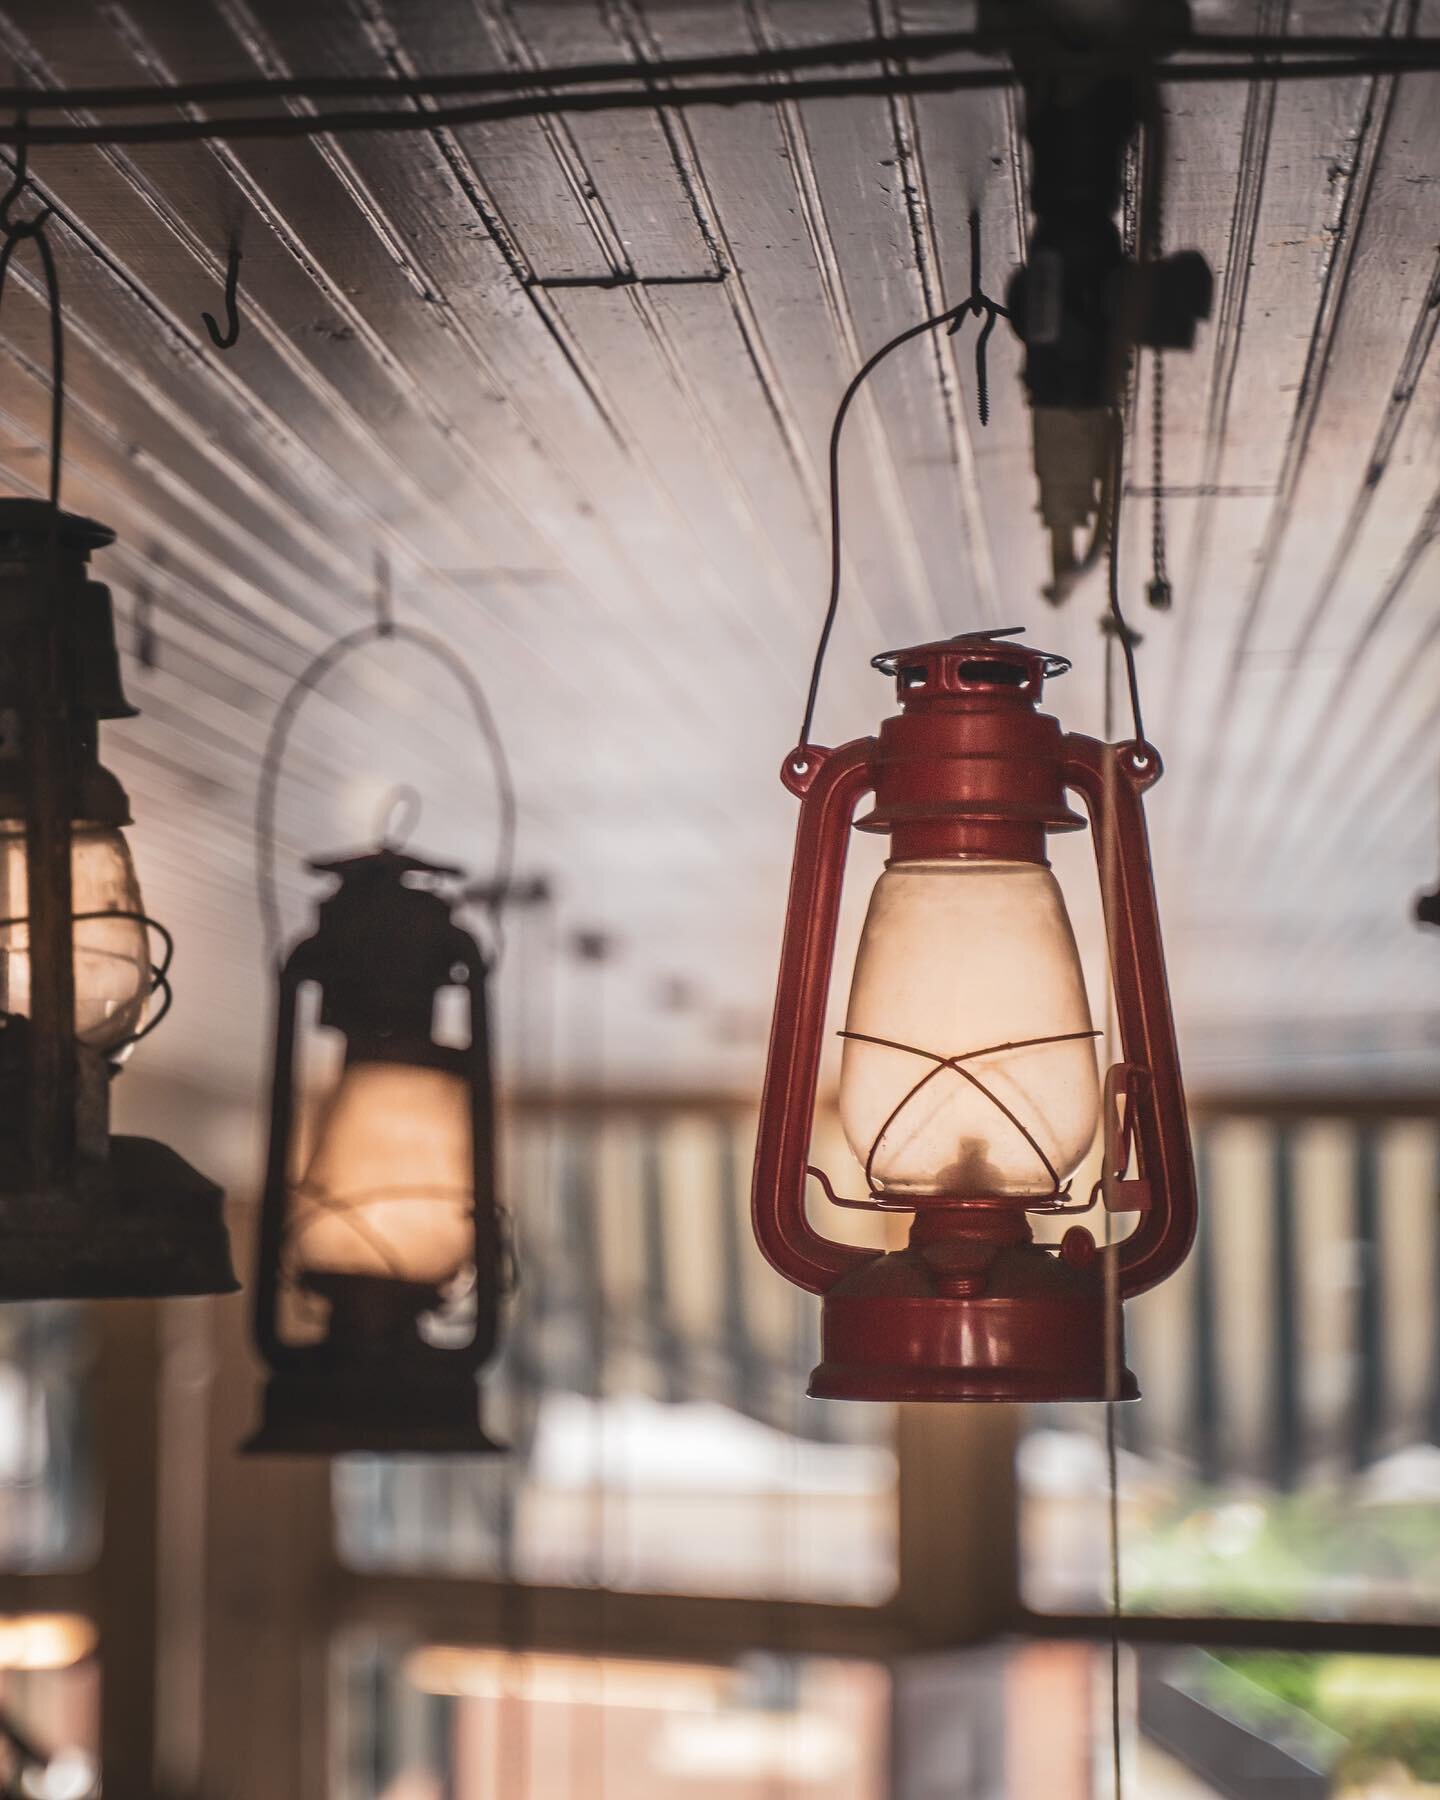 I saw these old lamps in Turner&rsquo;s hardware store when I was filing the other day. They were dark, but put some light in them, post the color, and voil&agrave;! That&rsquo;s the power of editing. Let me know what you think in the comments!
.
.
.